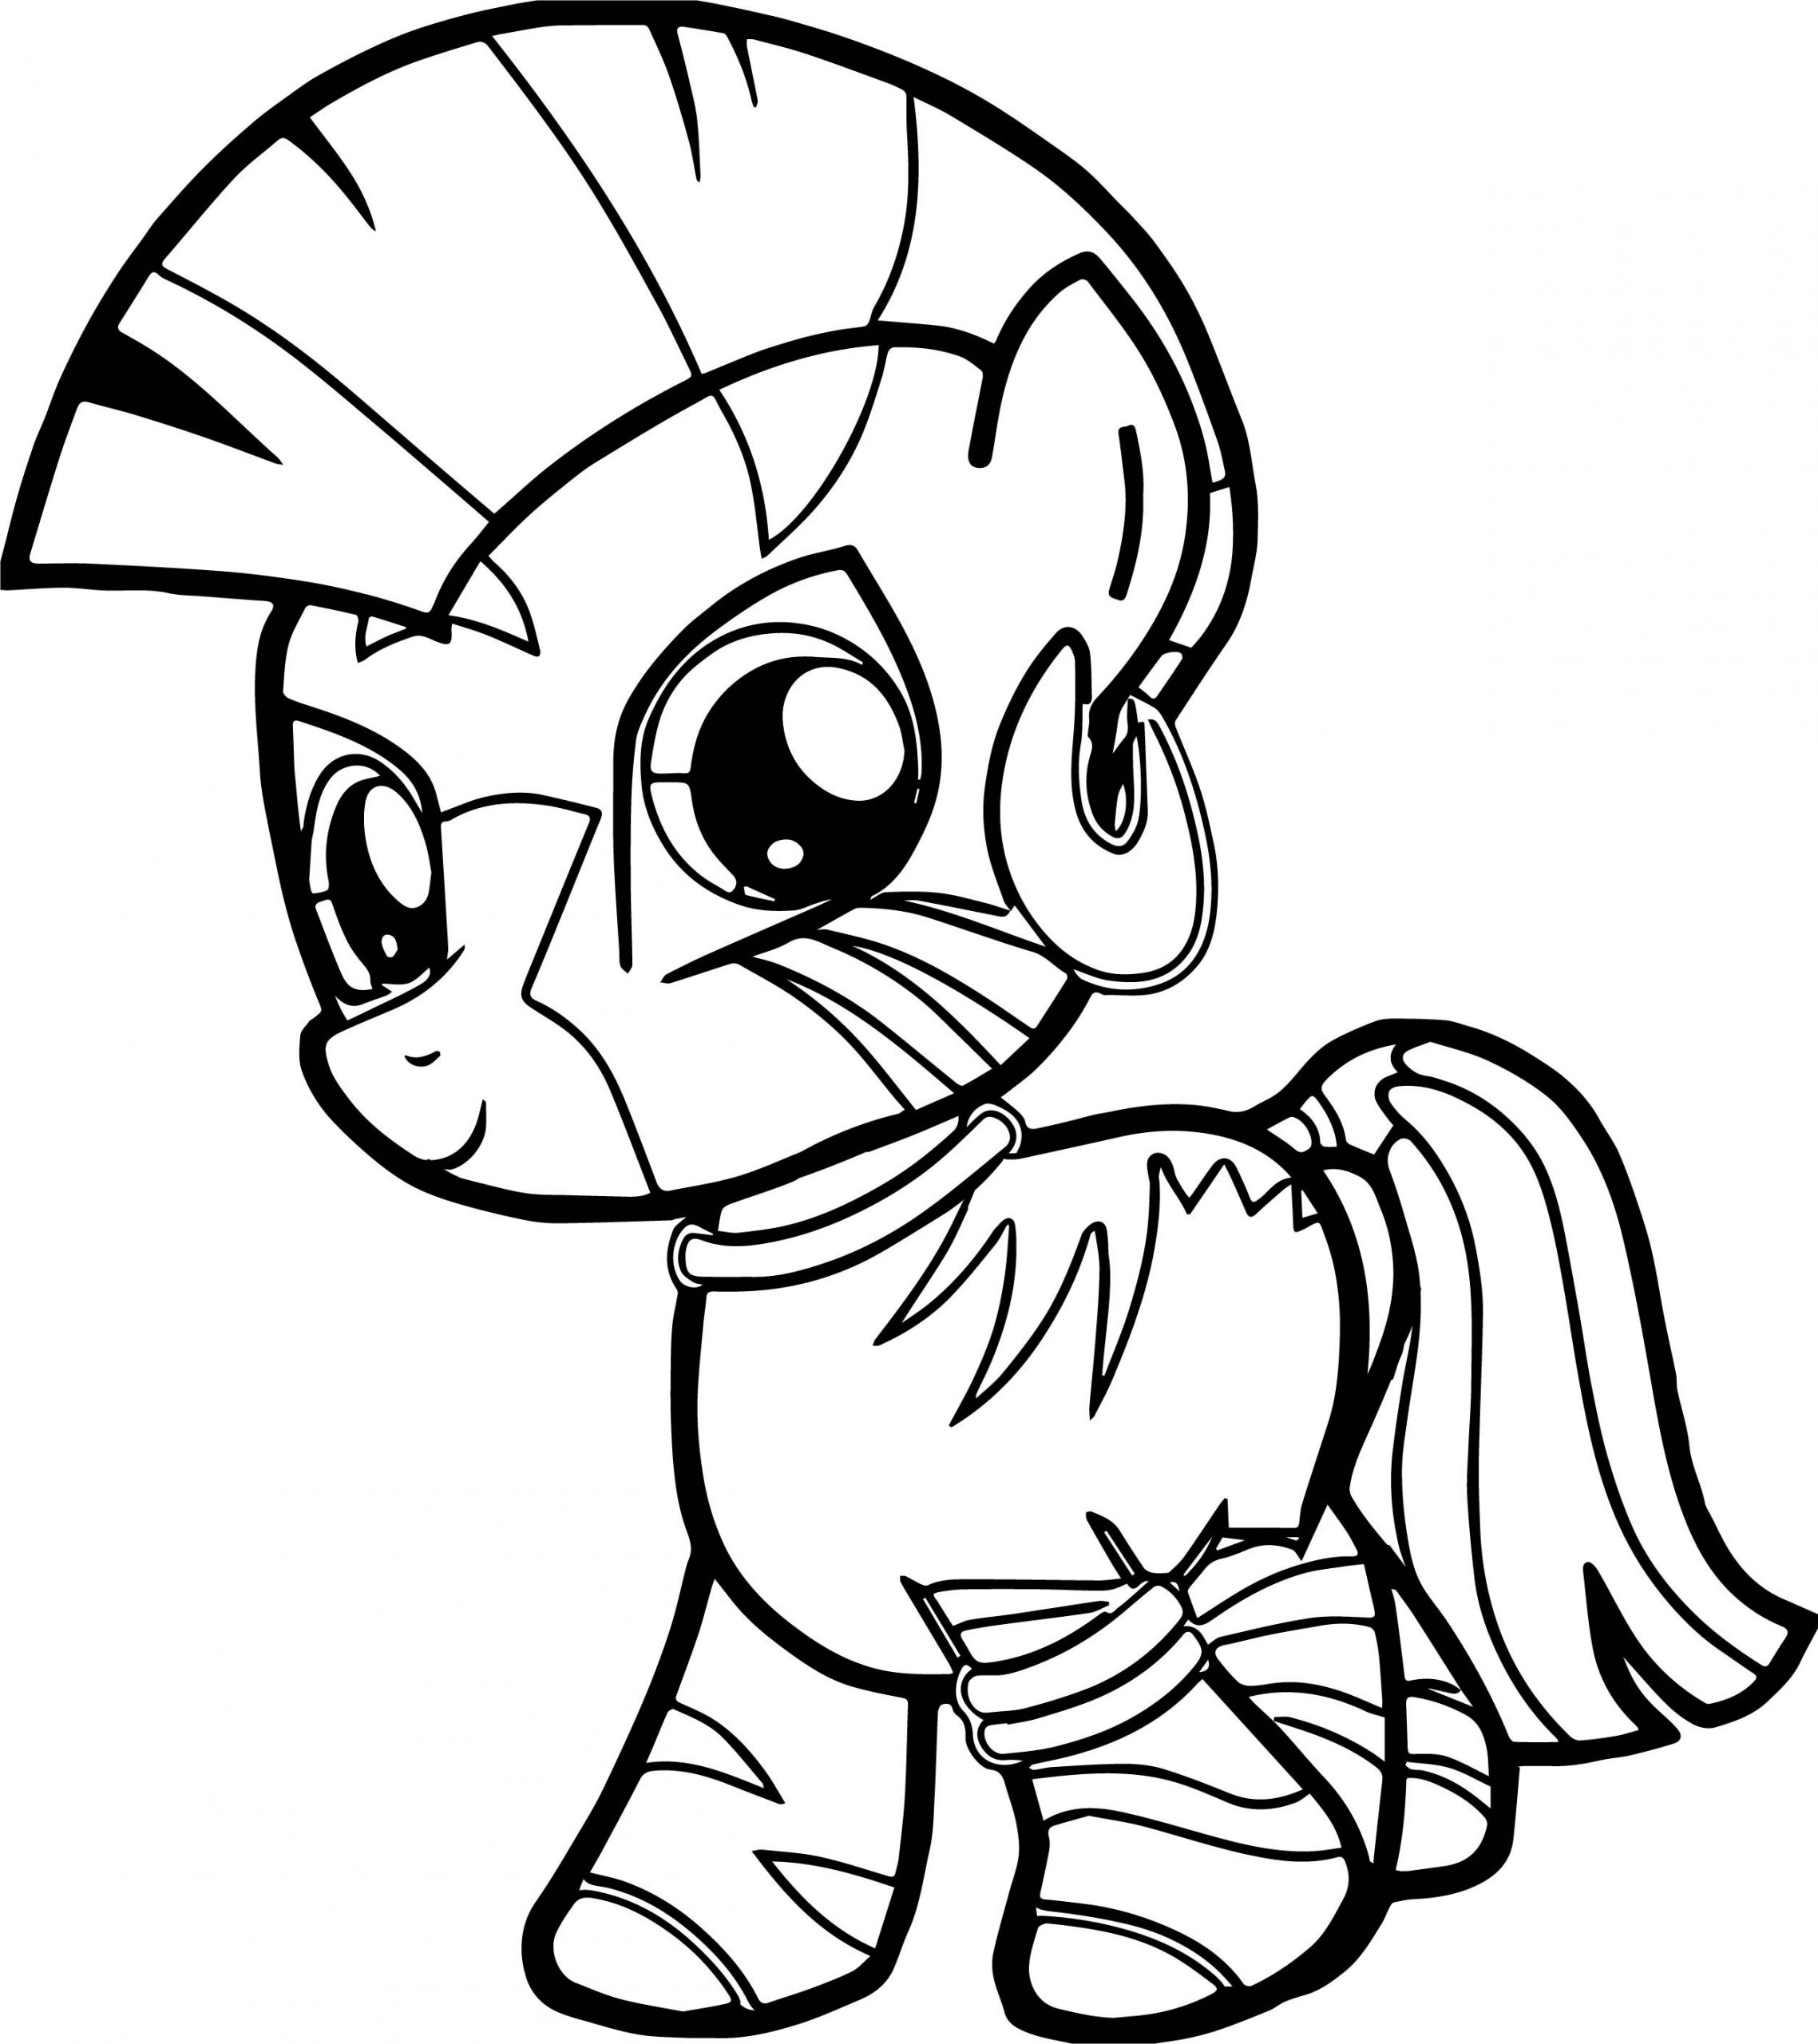 Baby Horse Coloring Pages
 Zecora Filly Very Cute Baby Horse Coloring Page